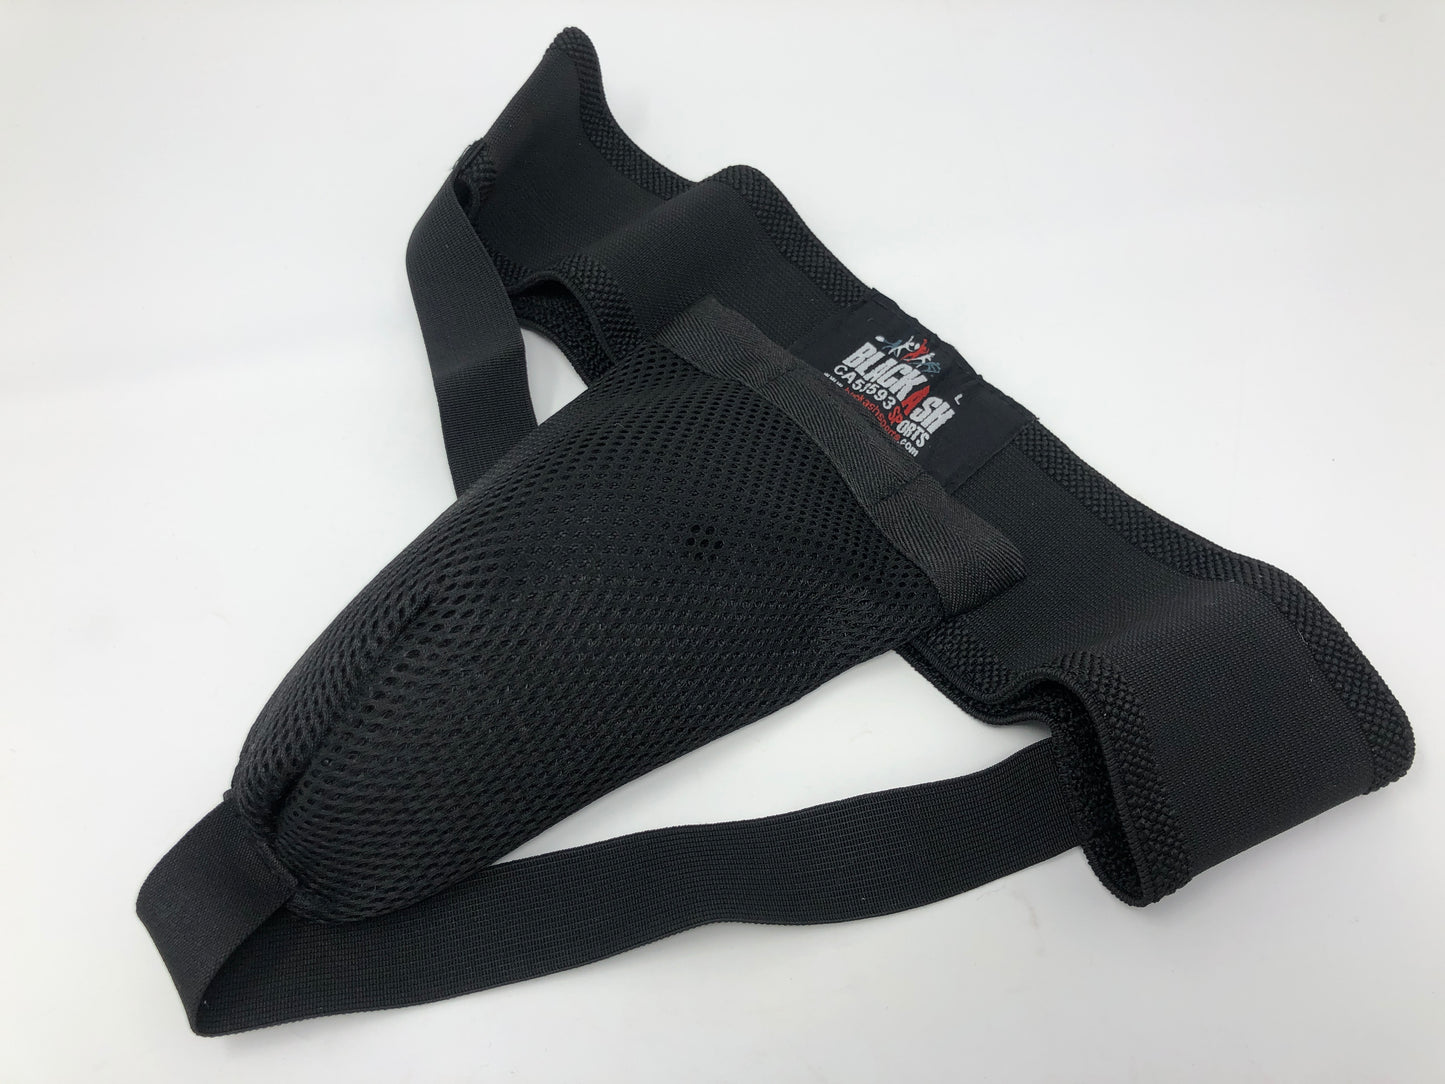 Black Ash abdominal guard with strap, made of solid polyethylene, featuring rubber edges for comfort, ventilated design for air circulation, ensuring protection during play